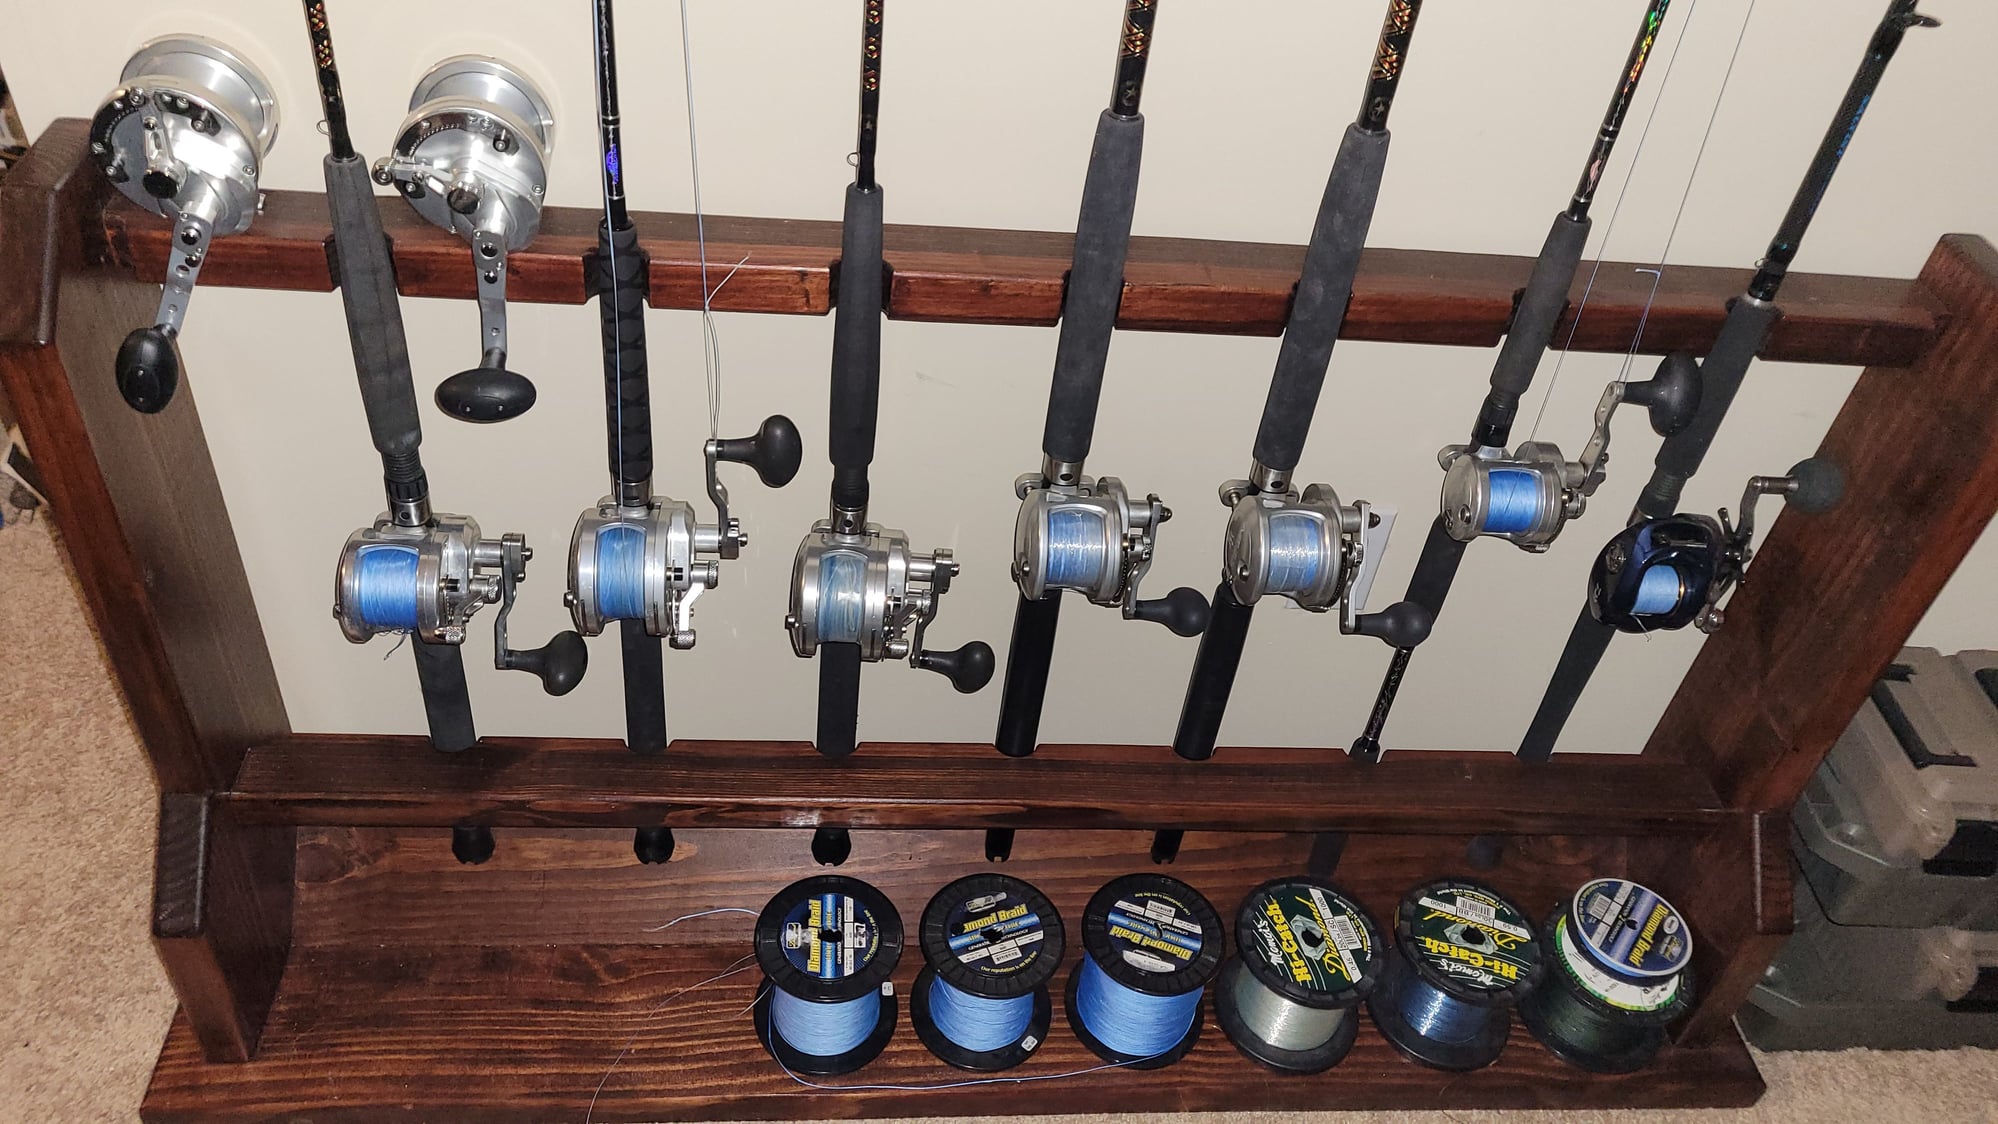 At home rod storage - Page 7 - The Hull Truth - Boating and